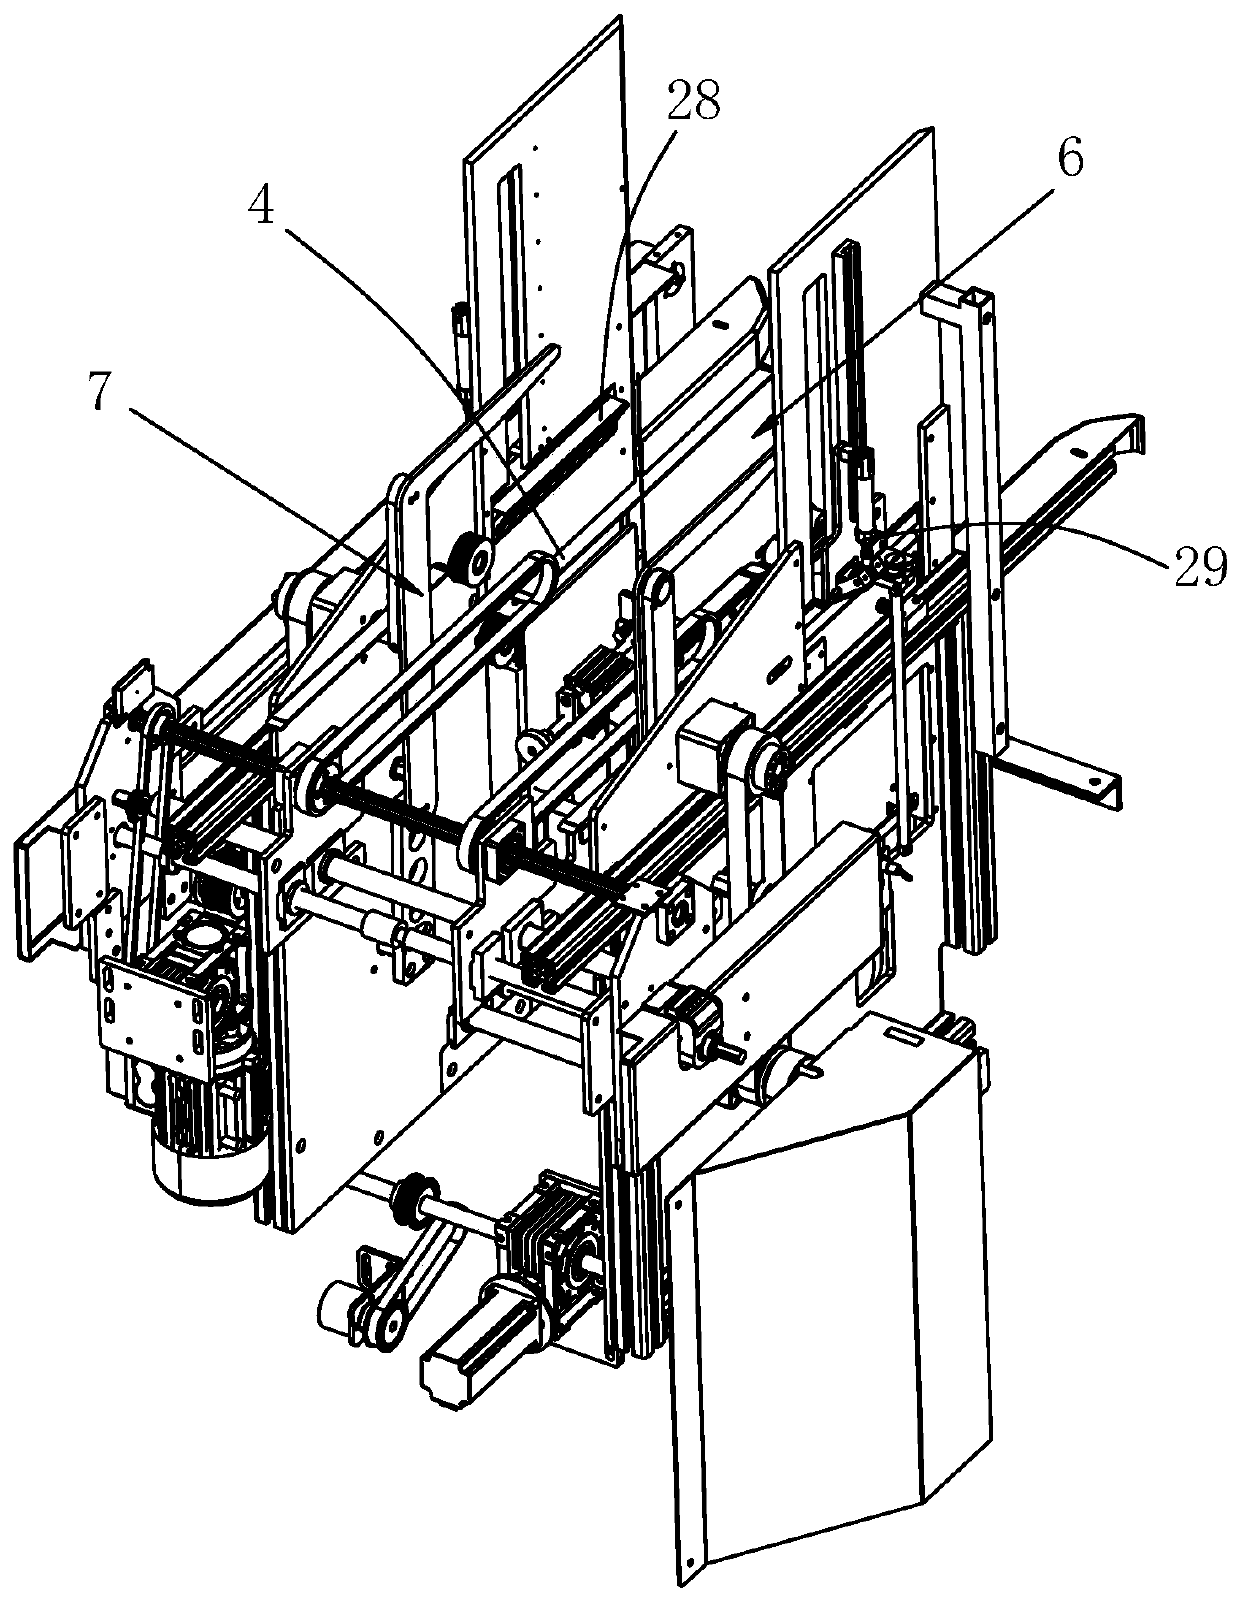 Book stacking equipment